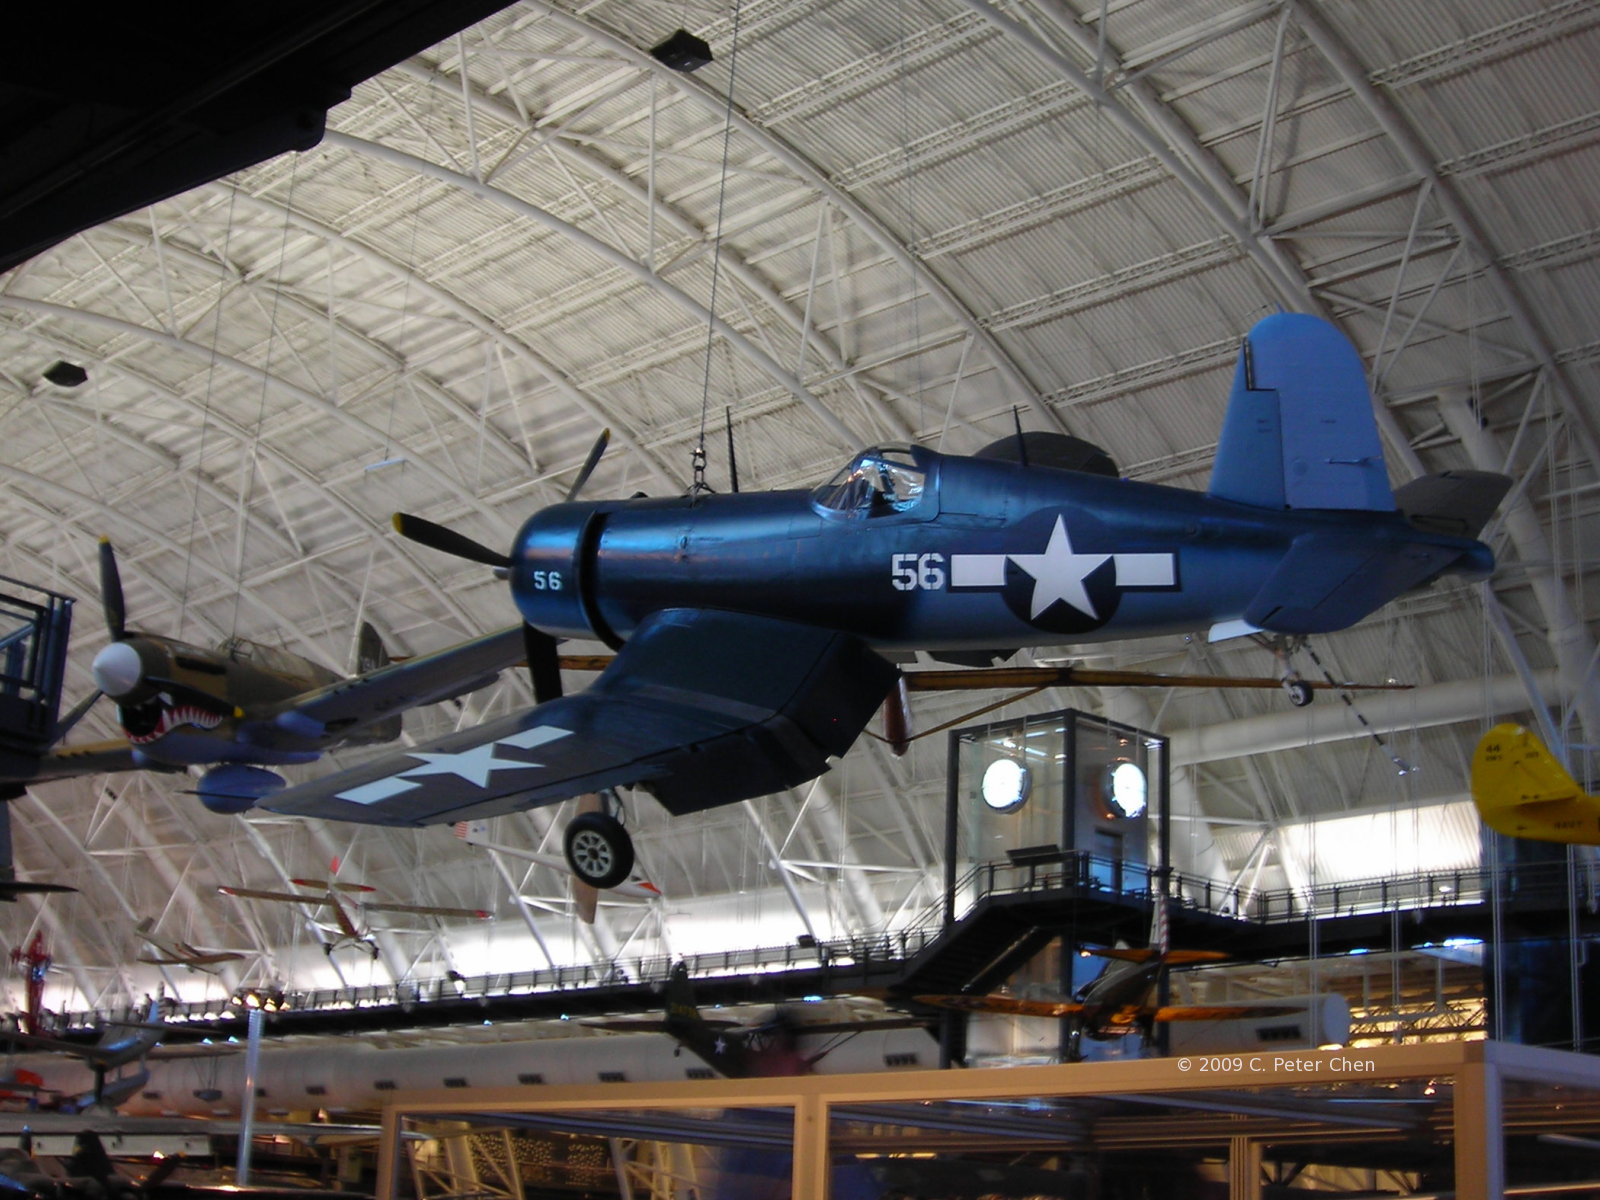 F4U Corsair fighter on display at the Smithsonian Air and Space Museum Udvar-Hazy Center, Chantilly, Virginia, United States, 26 Apr 2009, photo 2 of 2; note P-40E Warhawk fighter in background